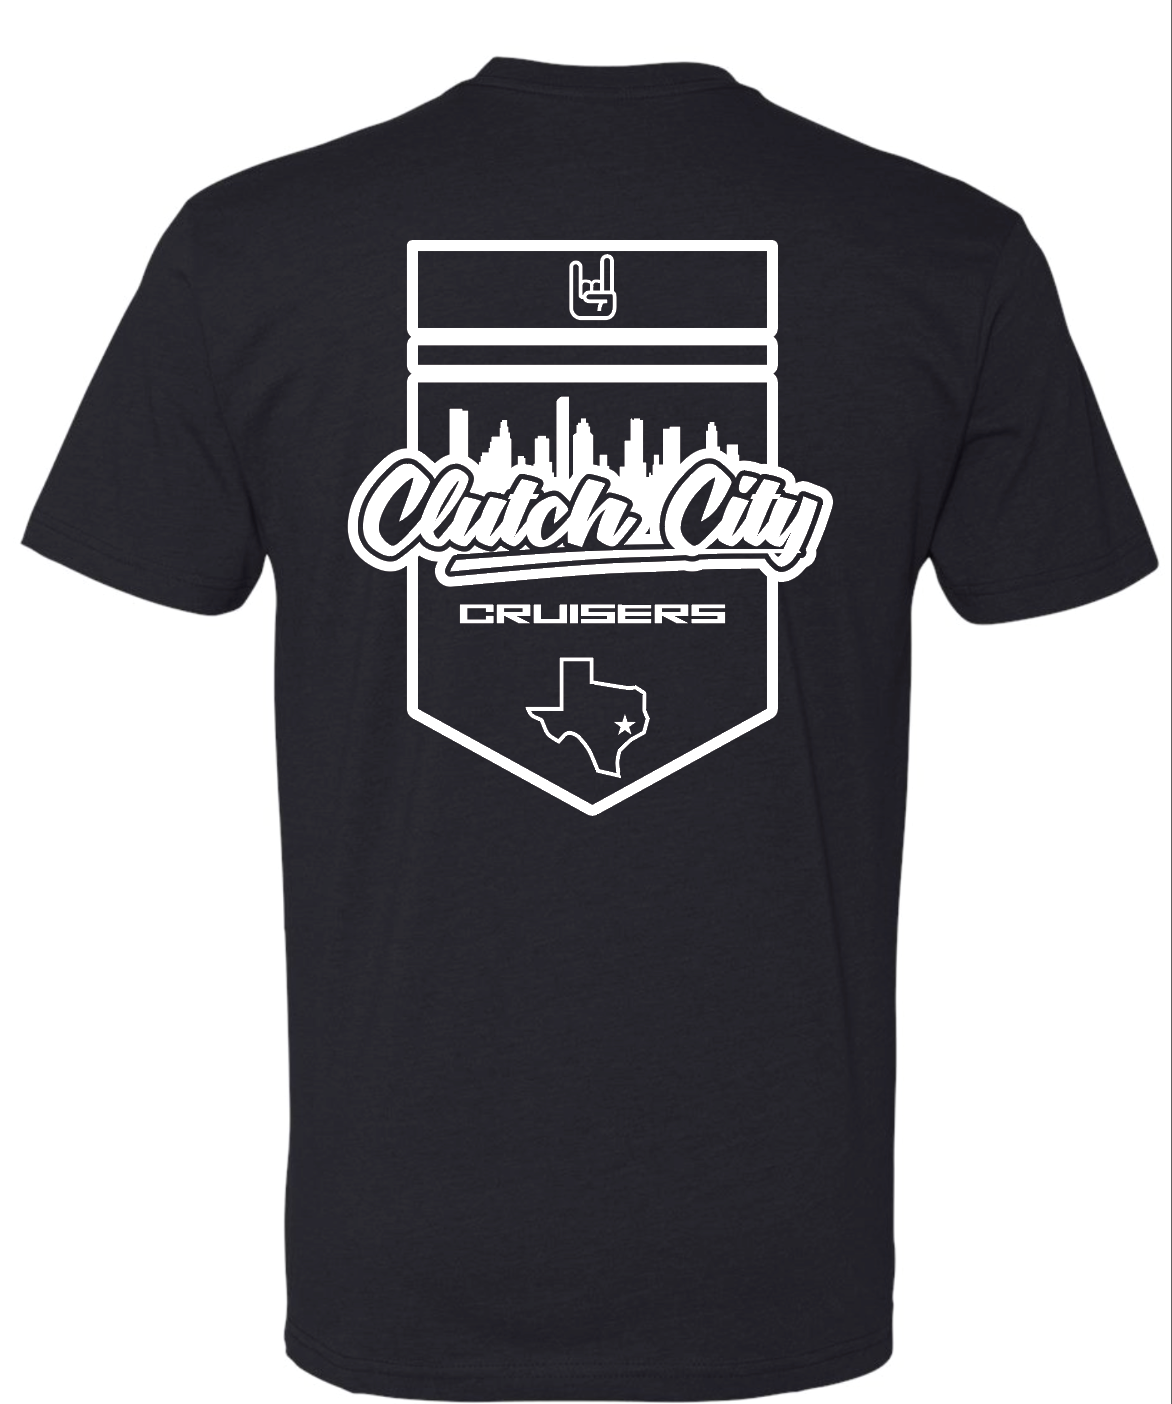 Clutch City Tee Black with White Print